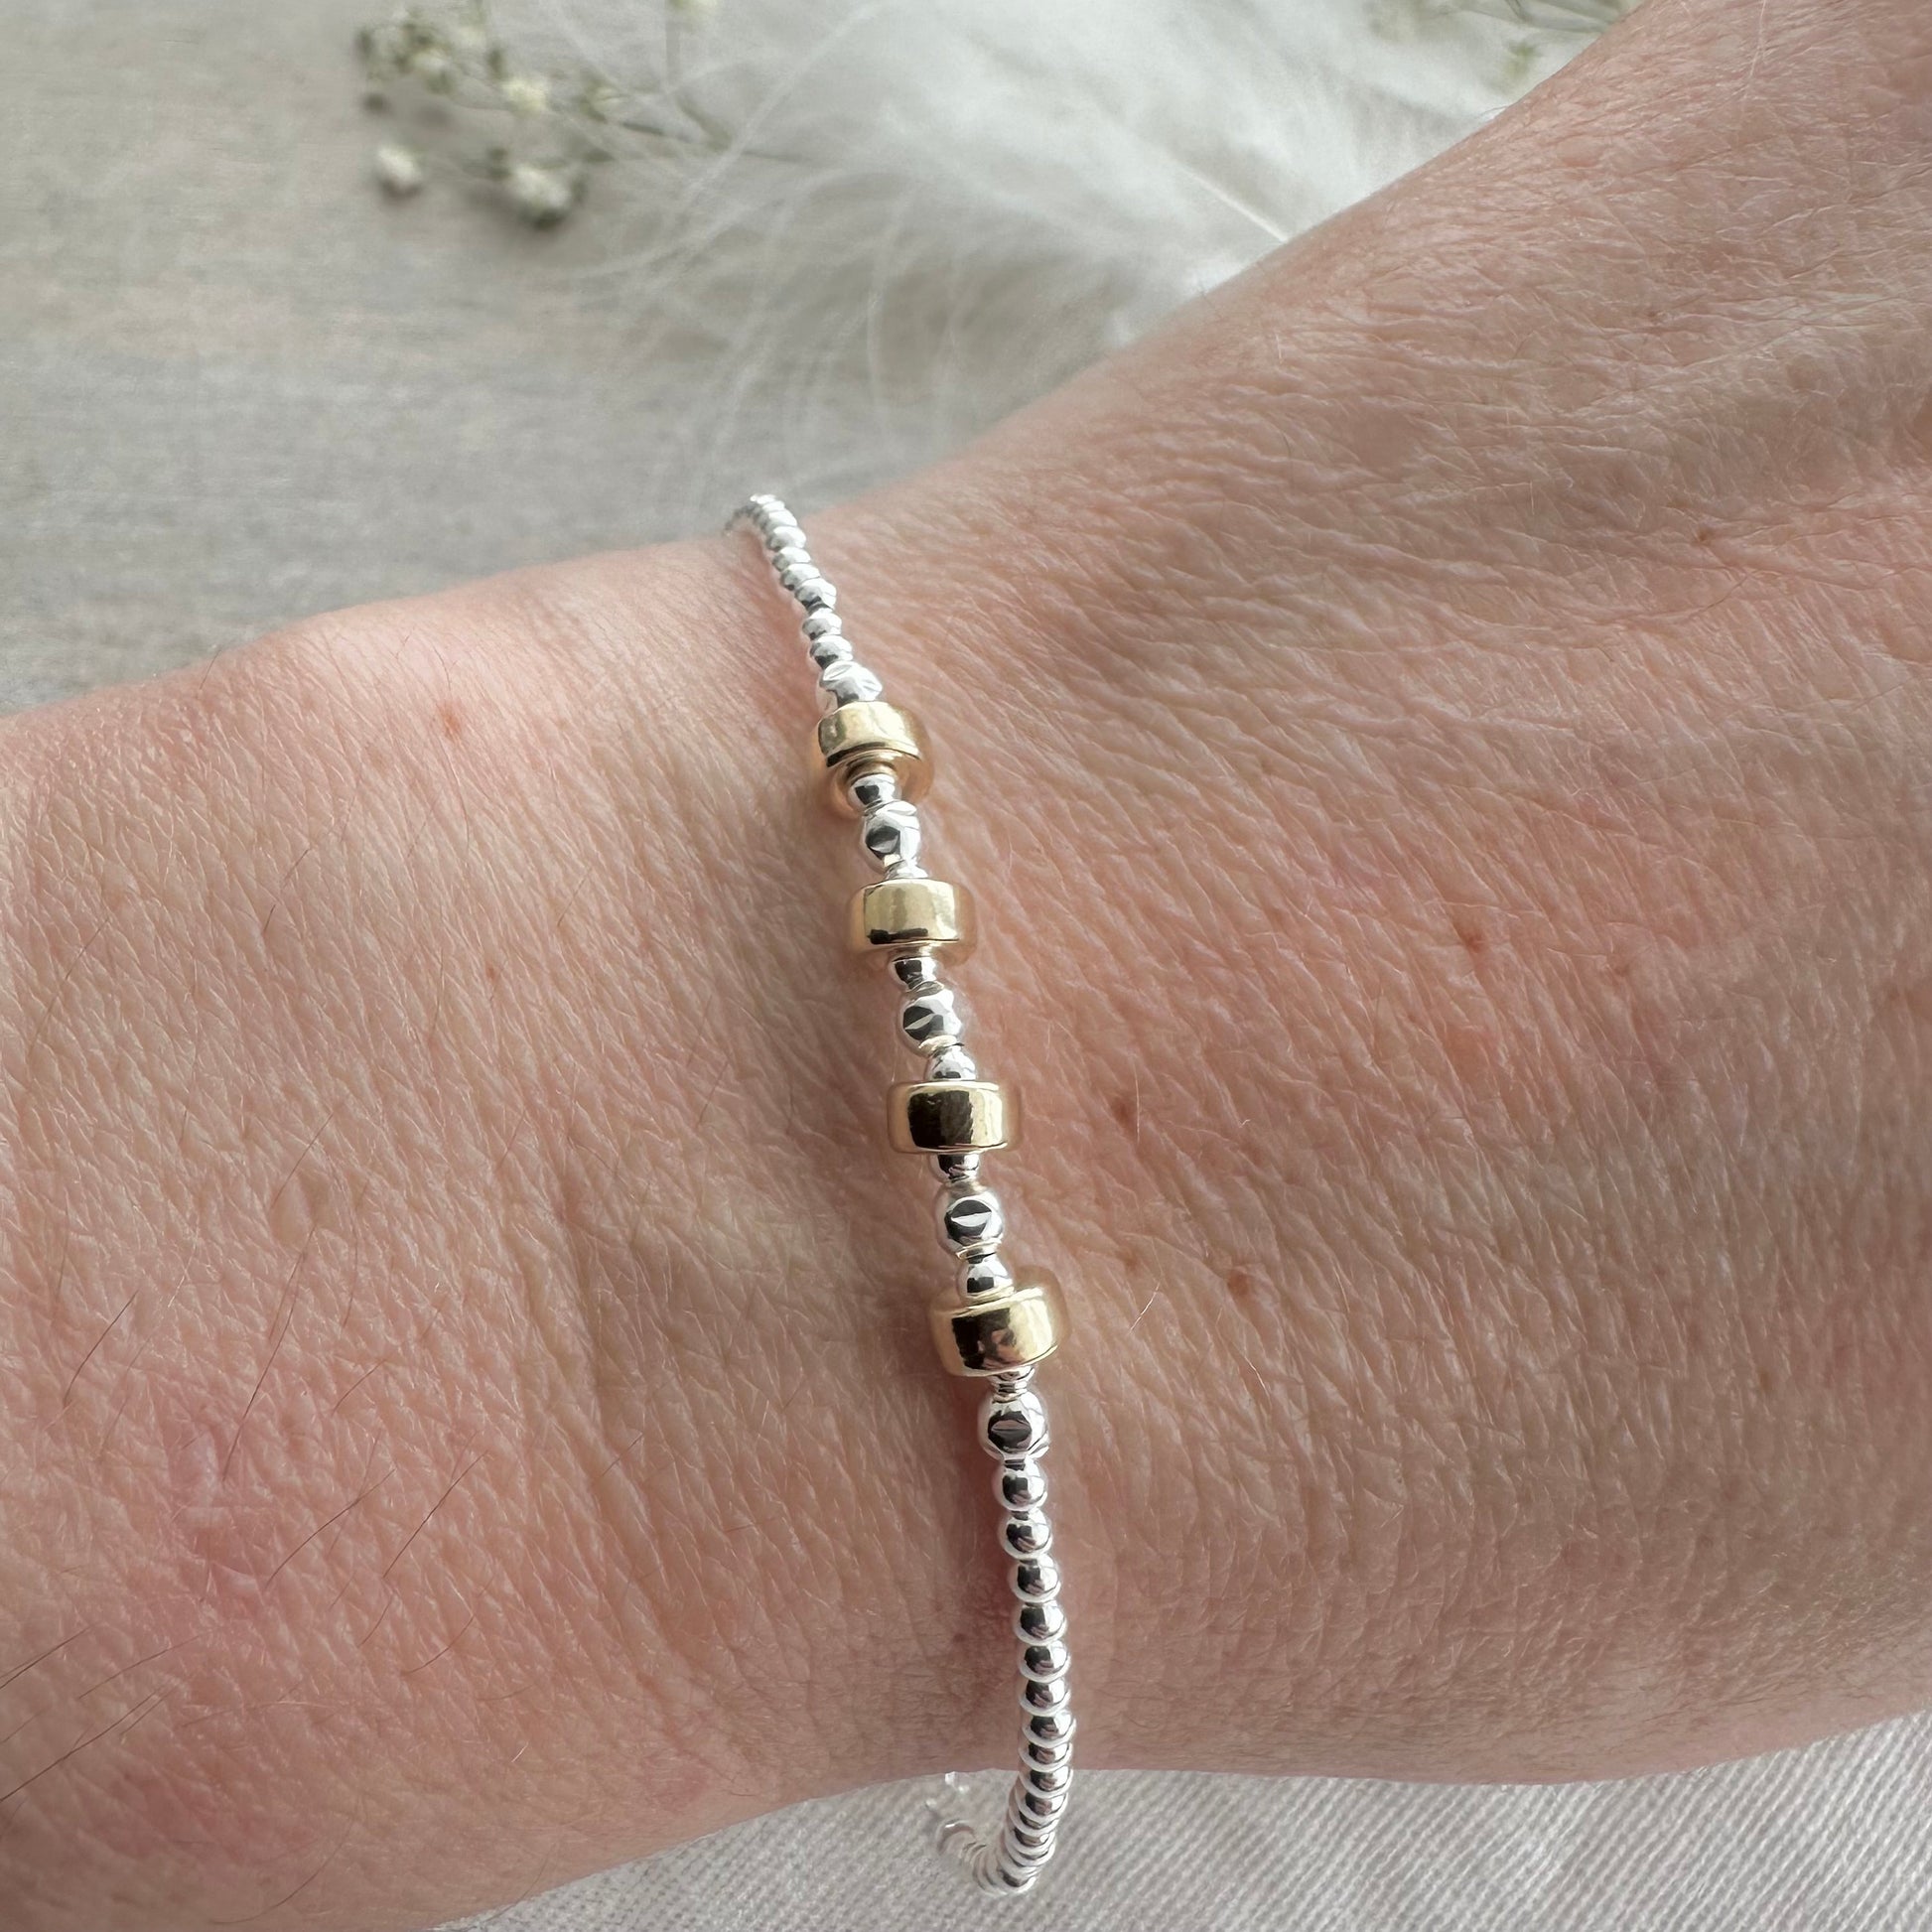 4 Decade Bracelet 40th Birthday Jewellery Gift for Her in Sterling Silver